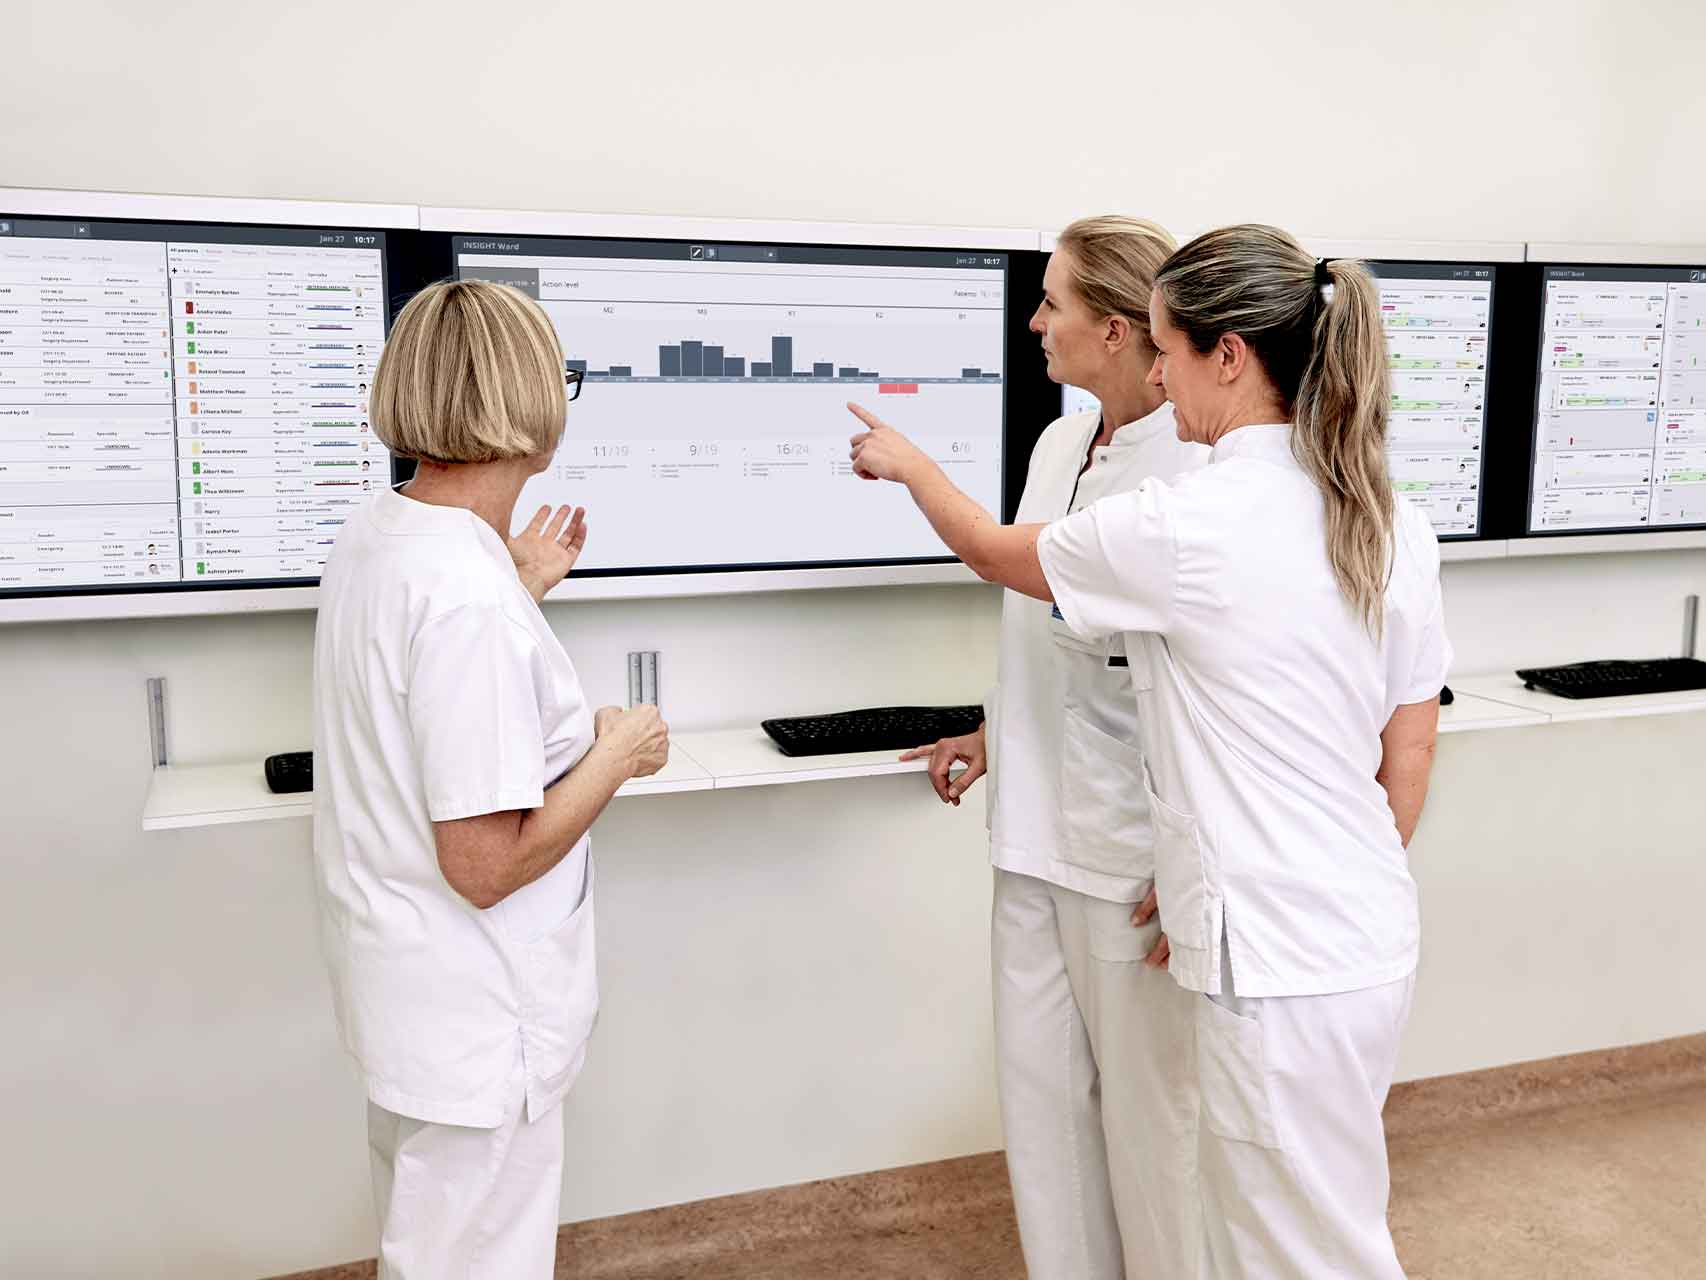 Nurses discuss bed capacity based on patient flow forecasts on screens from the INSIGHT patient flow management solution